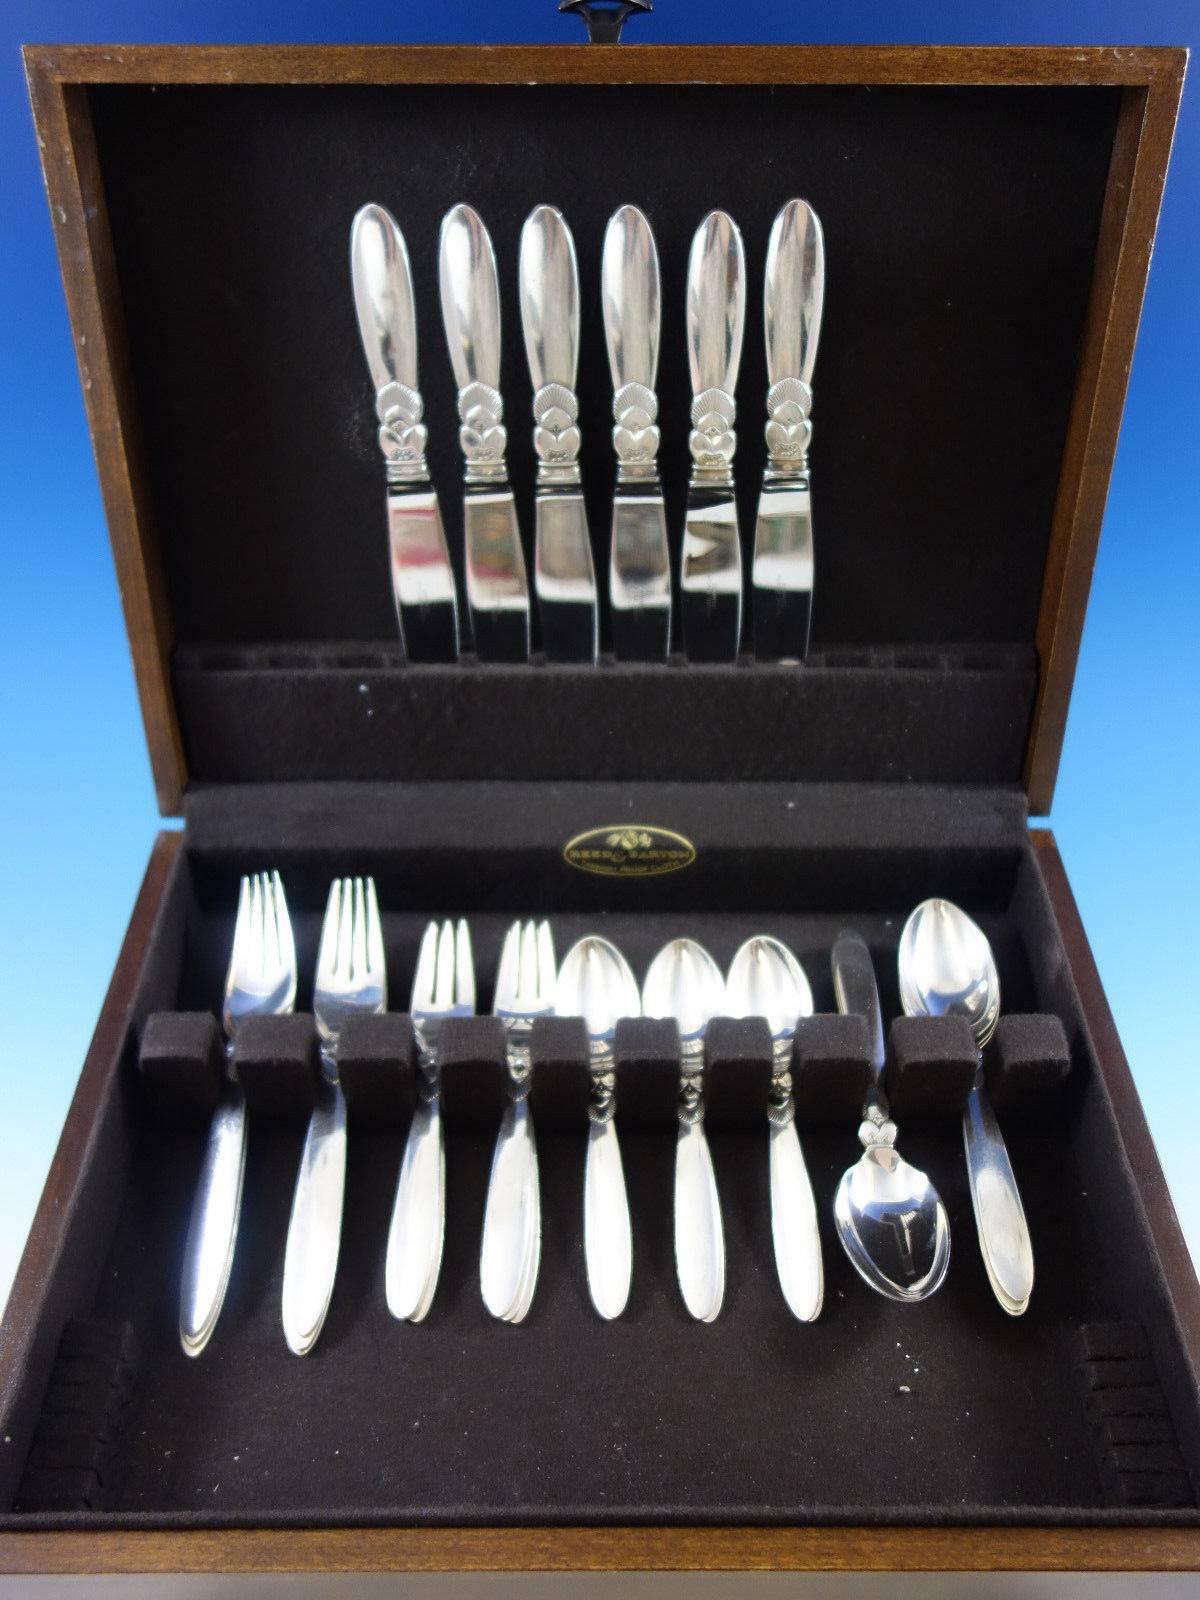 Cactus by Georg Jensen sterling silver flatware set of 30 pieces. Great starter set! This set includes: Six dinner size knives, short/wide handles, 9